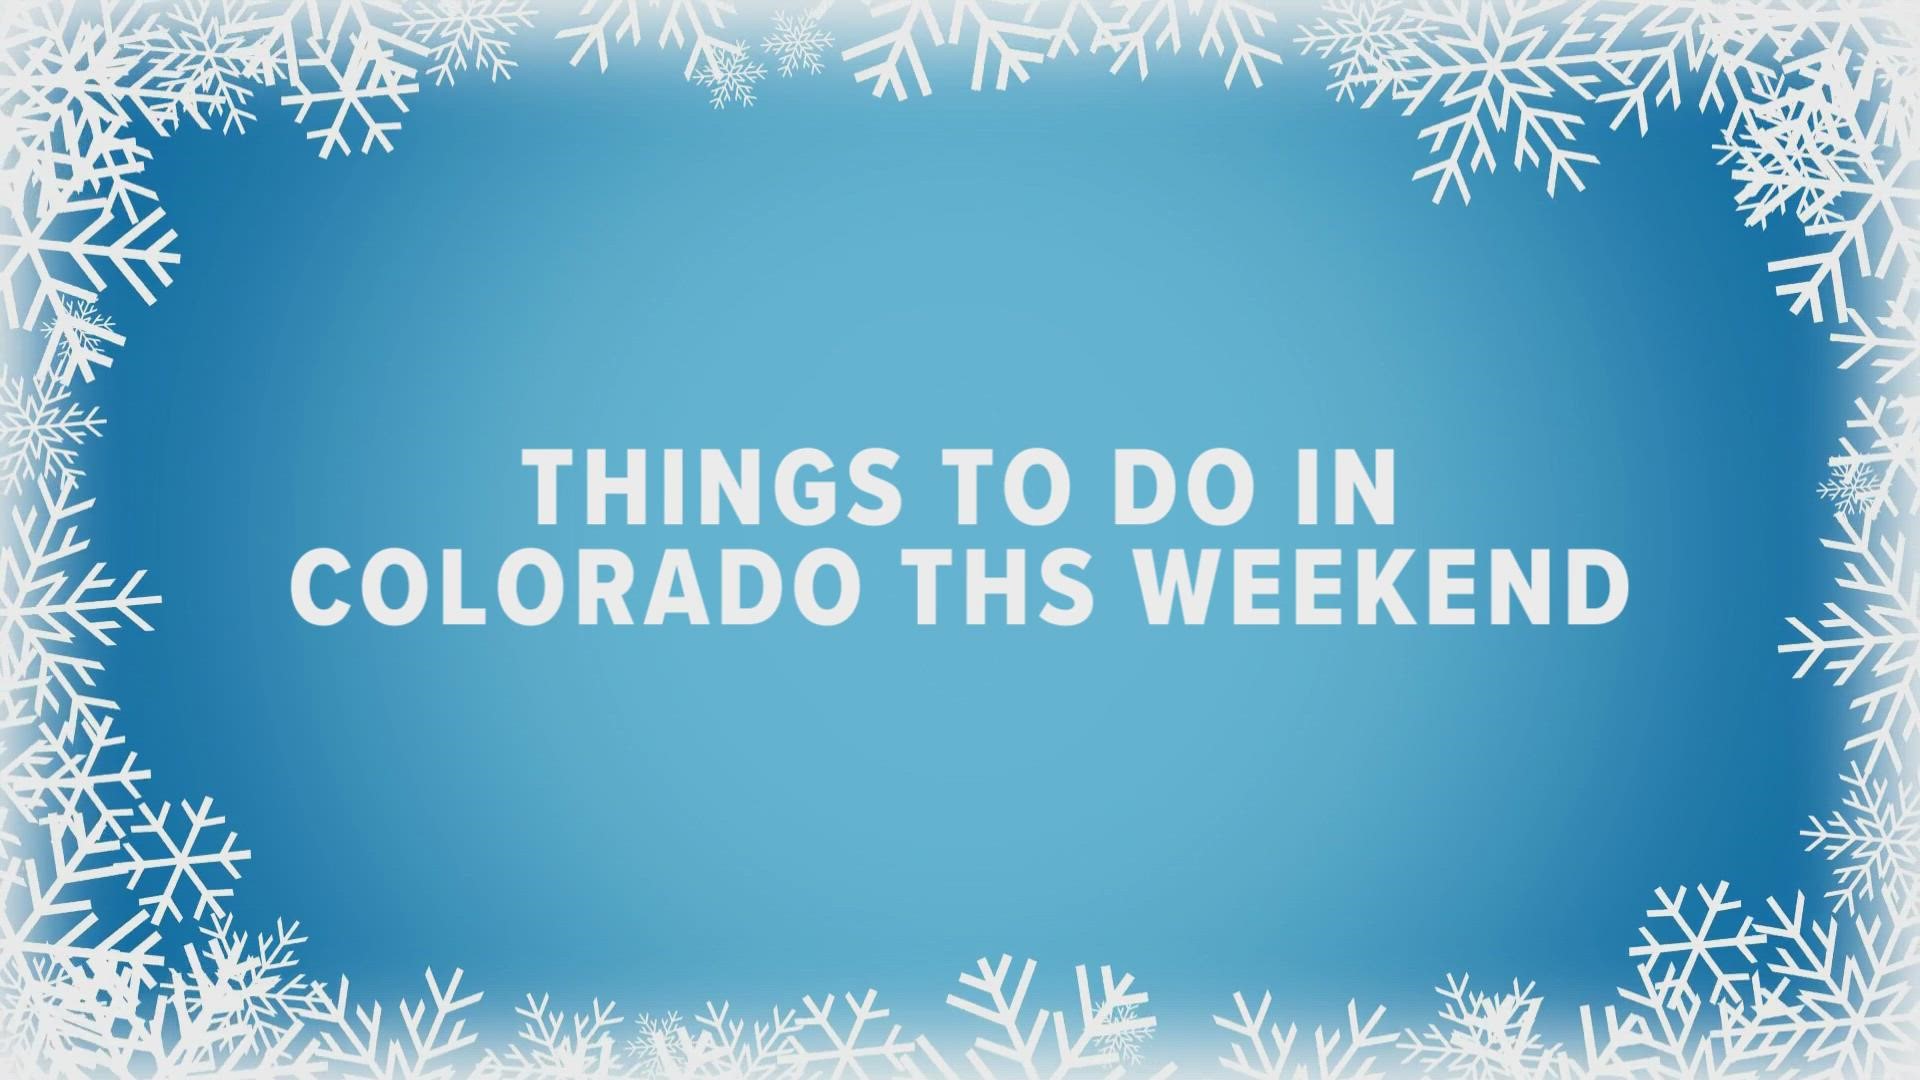 The holiday season has arrived in Colorado with parades, concerts, festivals and family-friendly winter events.